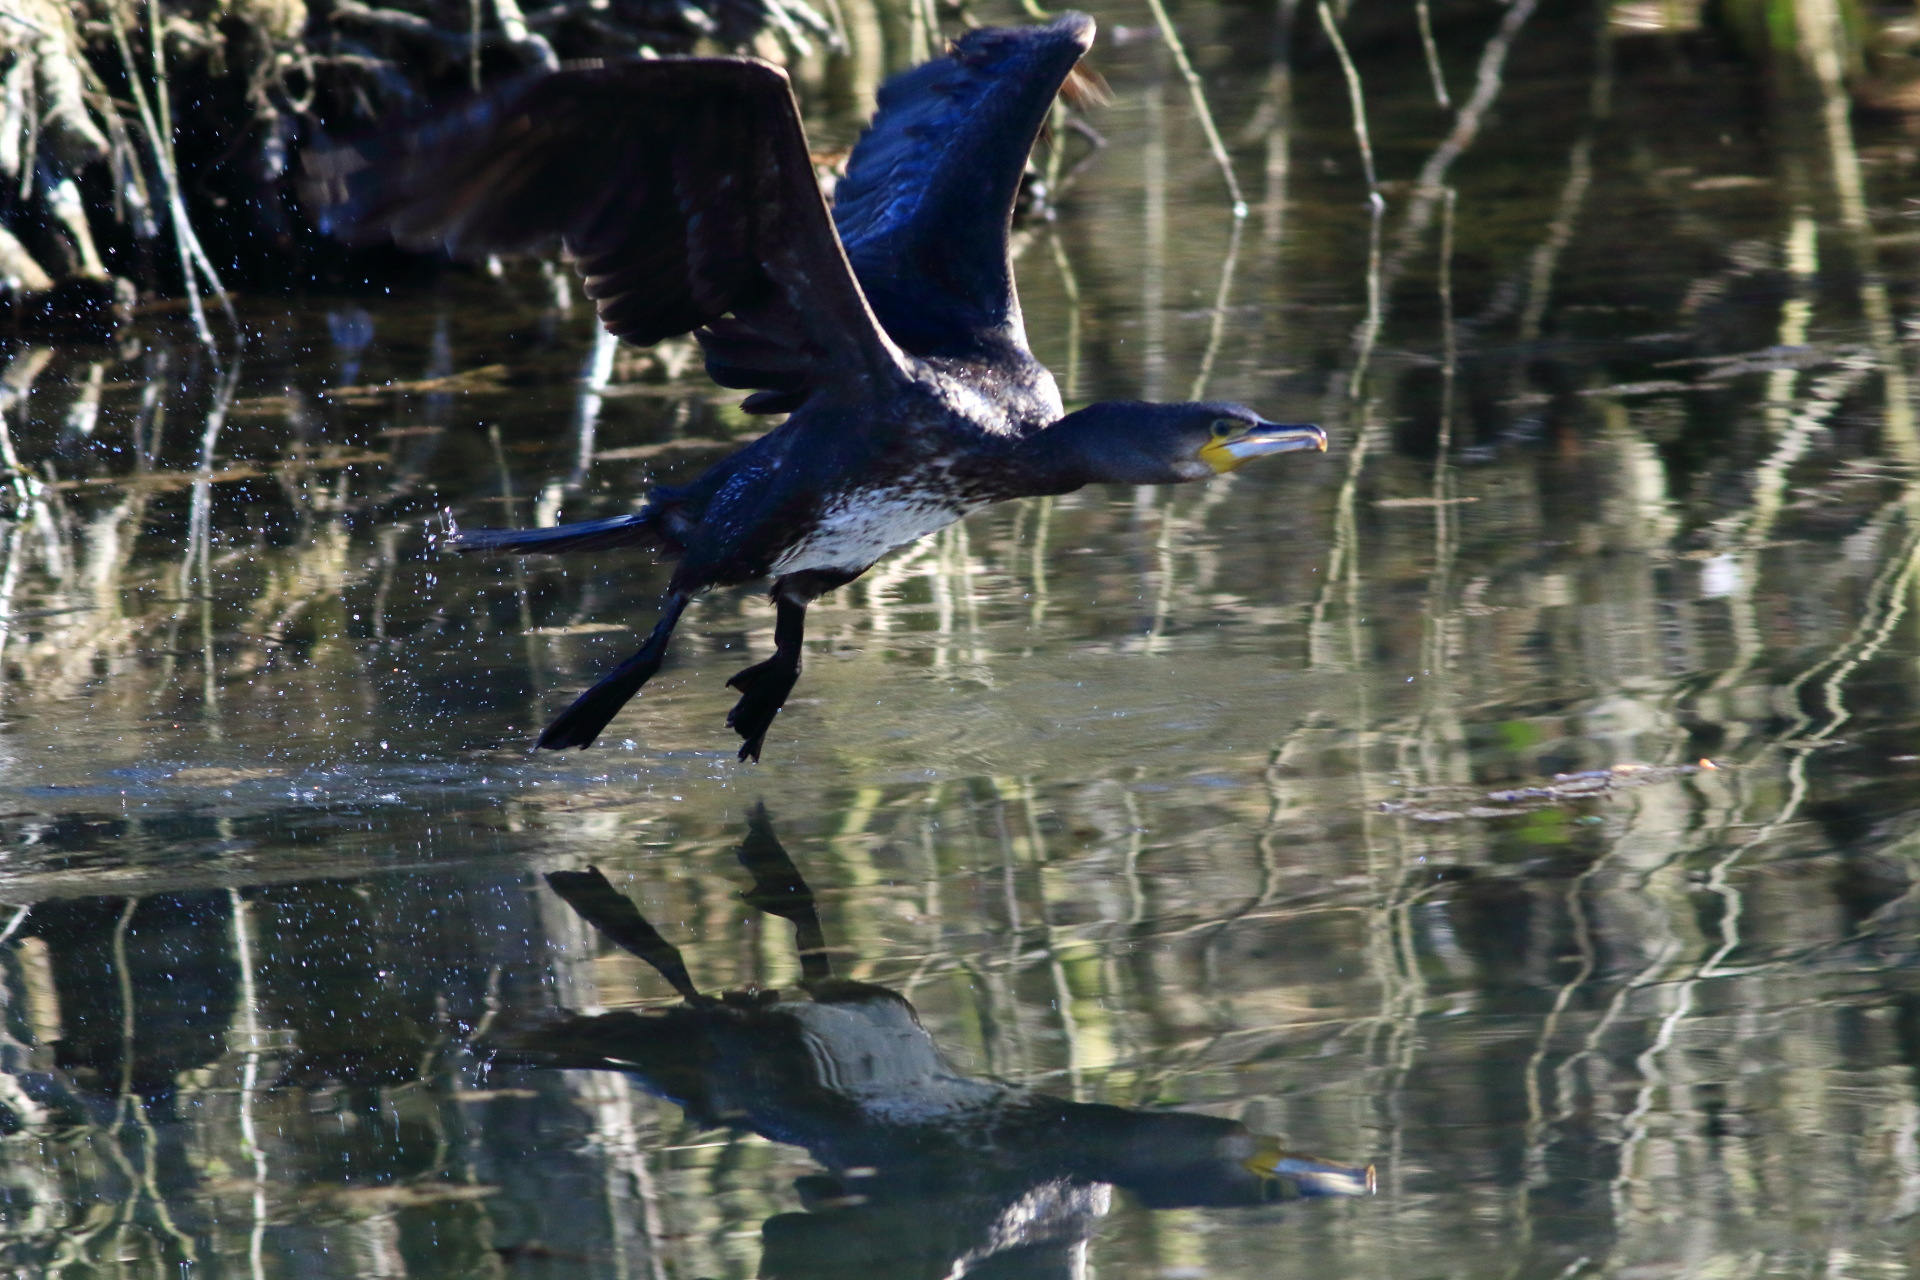 The takeoff of the cormorant...